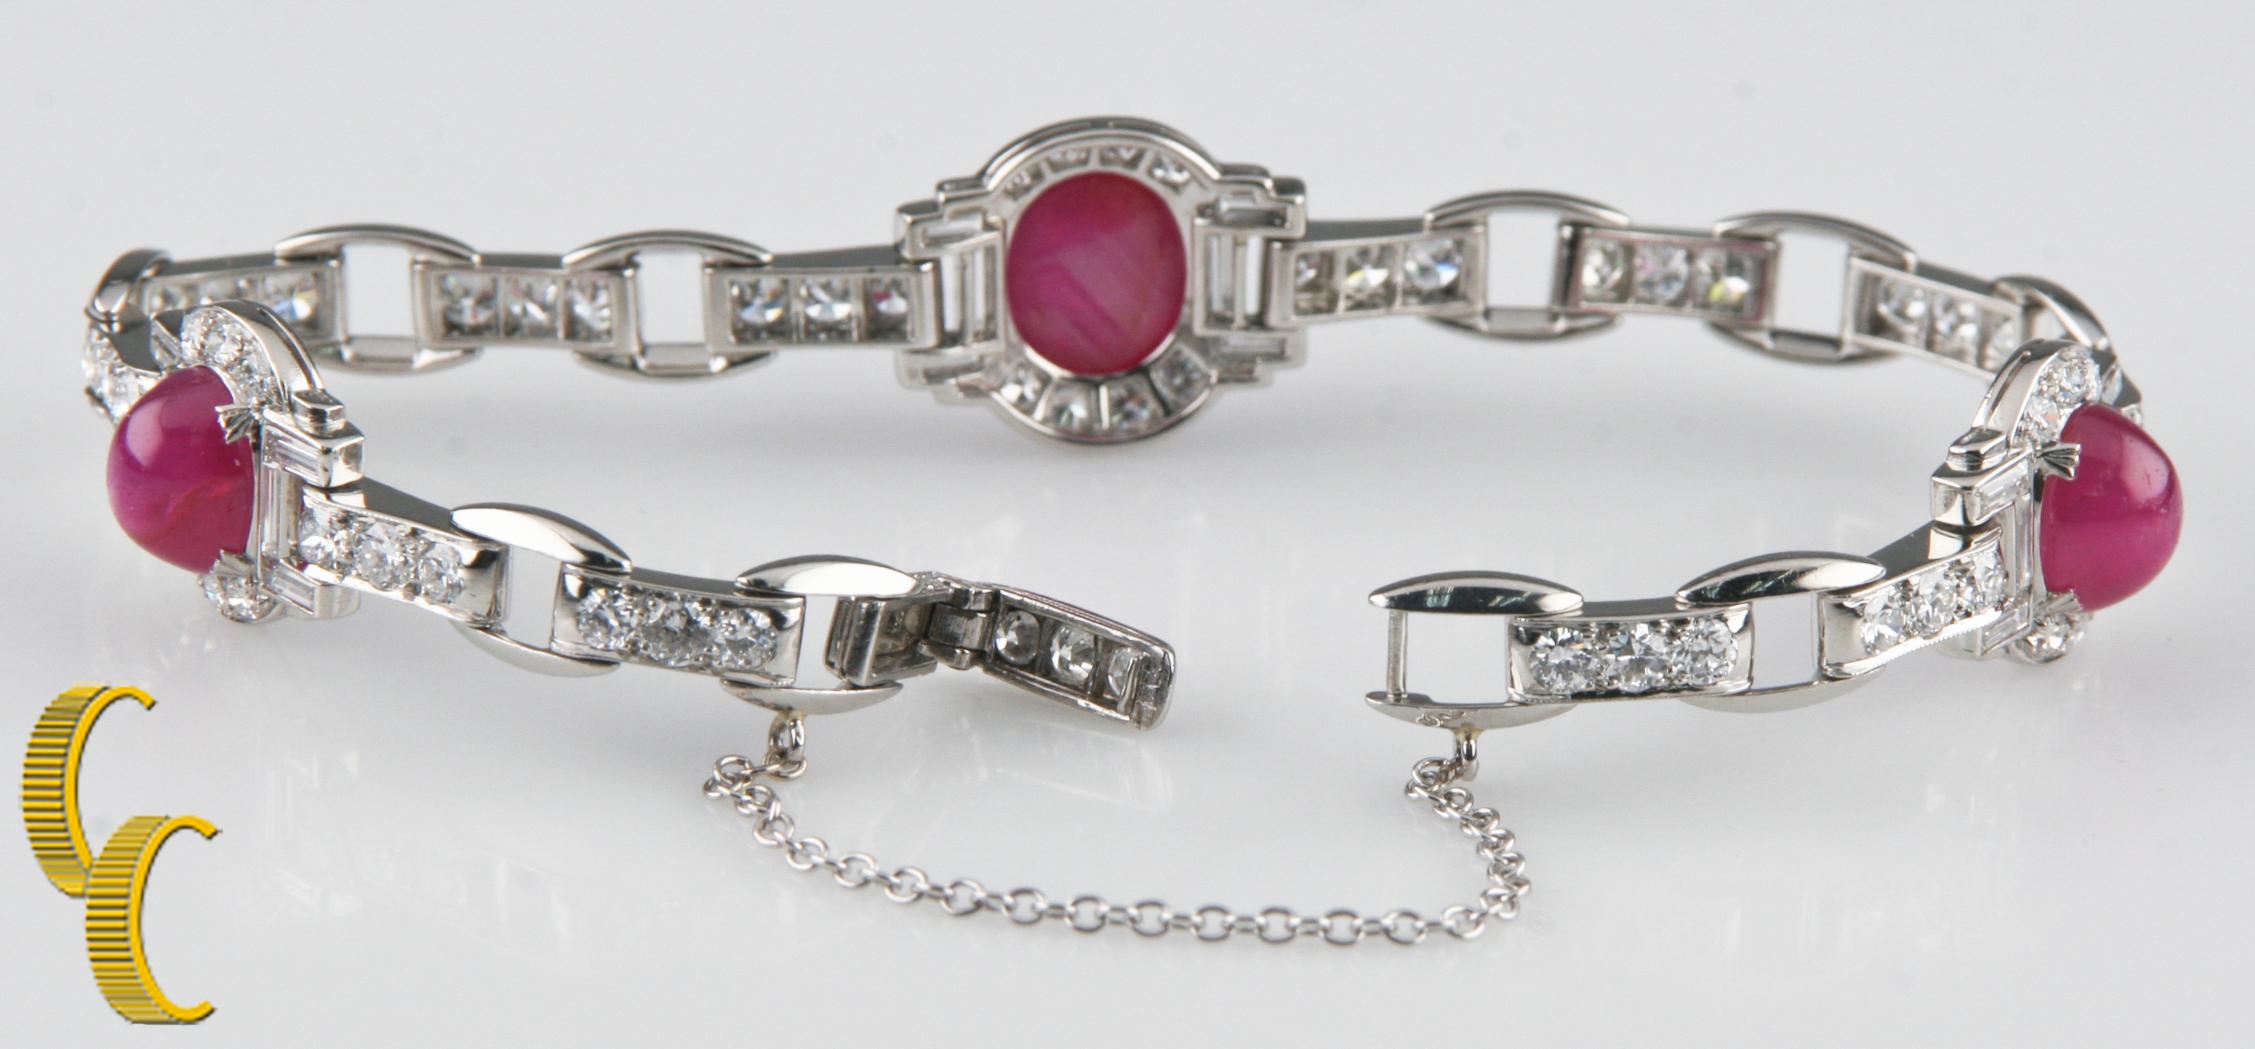 16.00 Carat Star Ruby and Diamond 18 Karat White Gold Bracelet In Excellent Condition For Sale In Sherman Oaks, CA